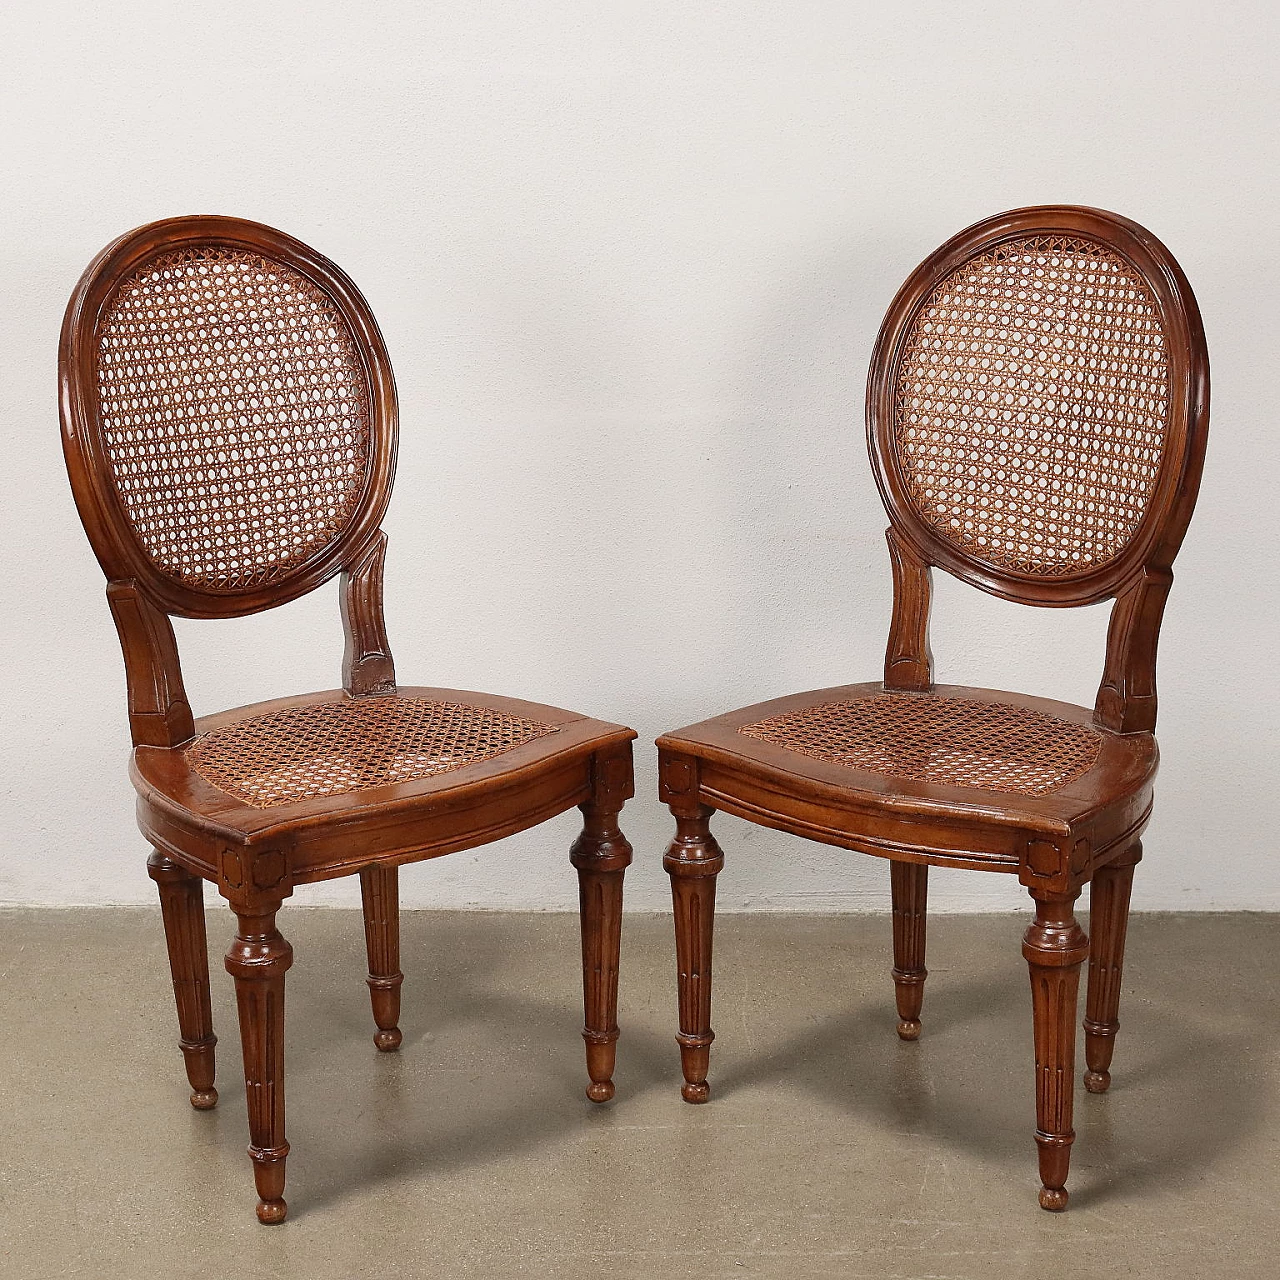 Pair of walnut and cane chairs with removable cushions, 18th century 3